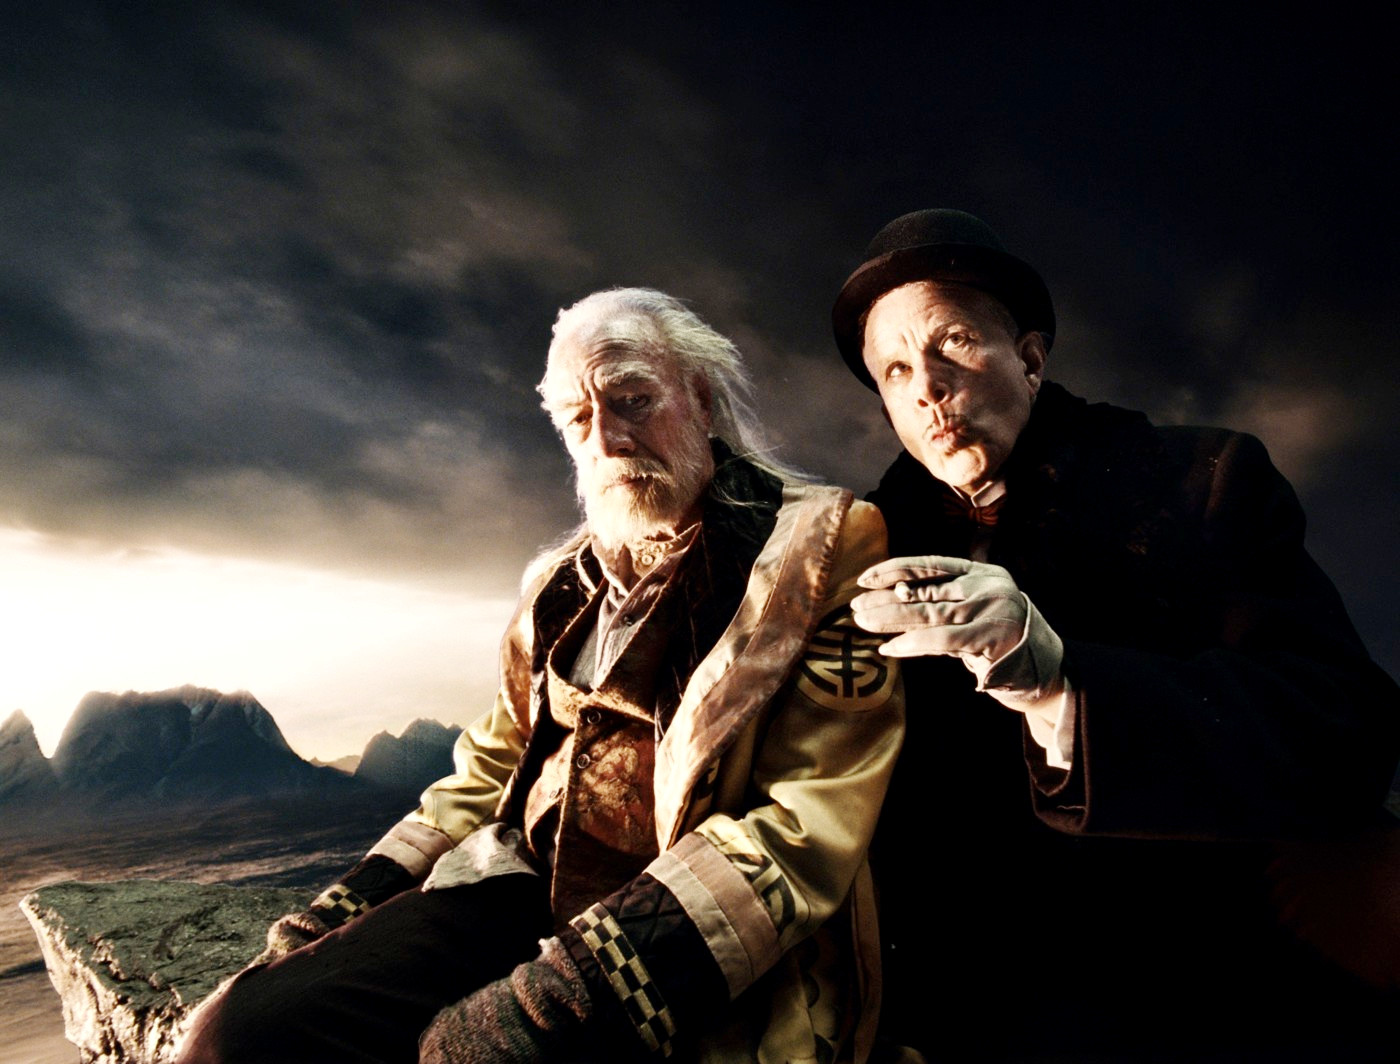 Christopher Plummer stars as Dr. Parnassus and Tom Waits stars as Mr. Nick in Sony Pictures Classics' The Imaginarium of Doctor Parnassus (2009)